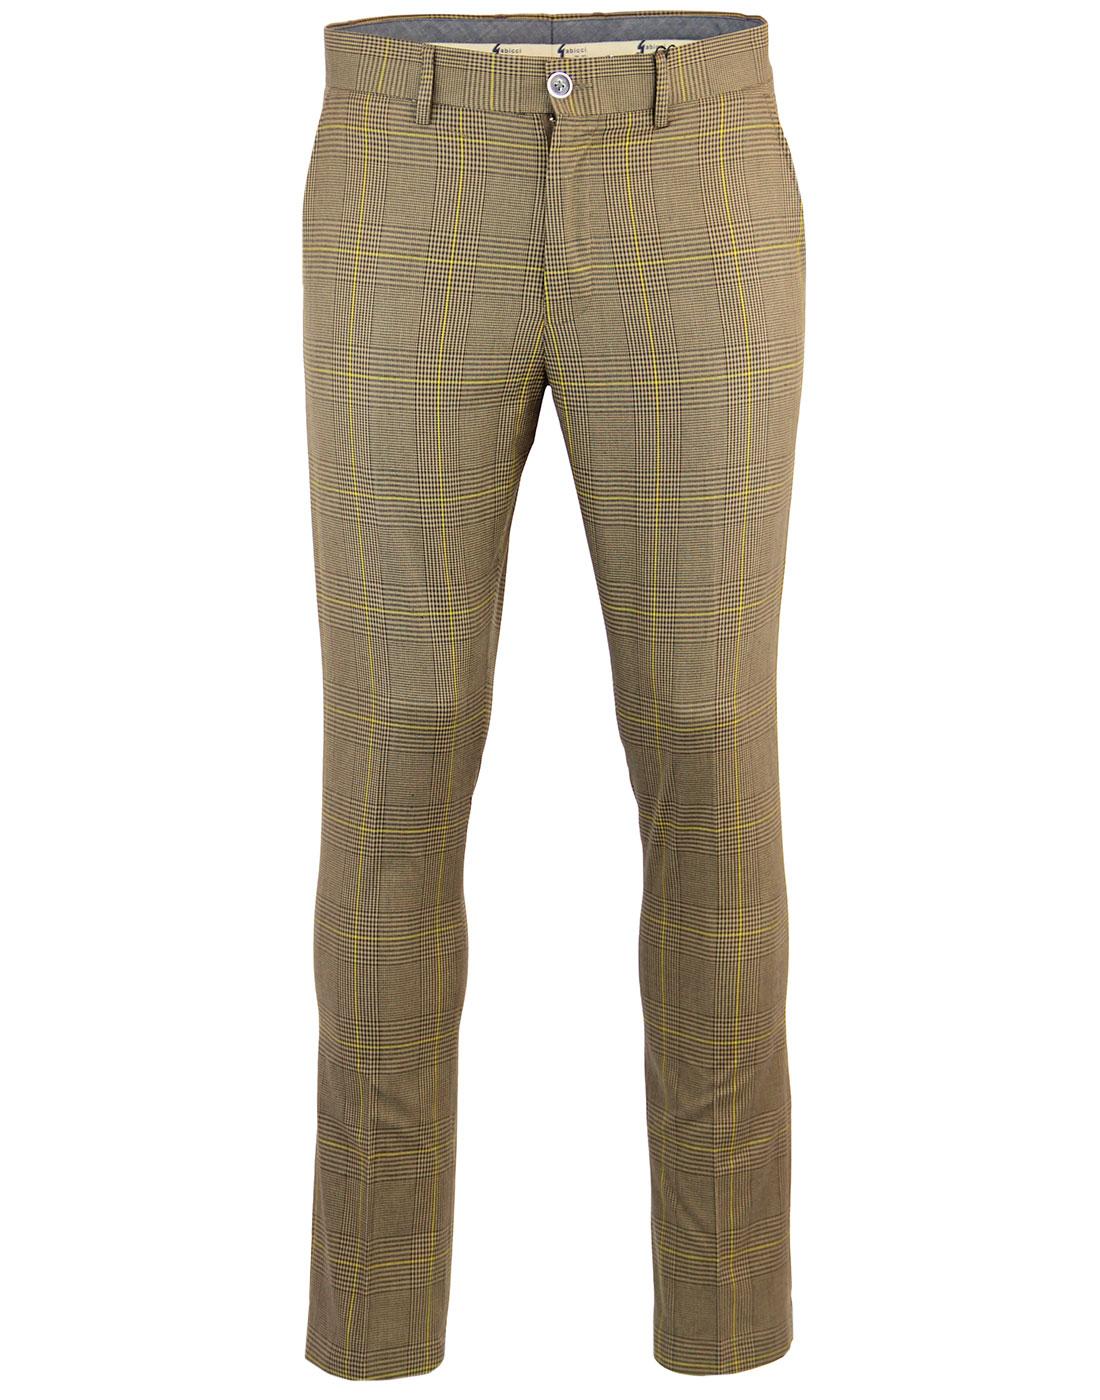 GABICCI VINTAGE Retro 1960s Mod Prince of Wales Check Trousers